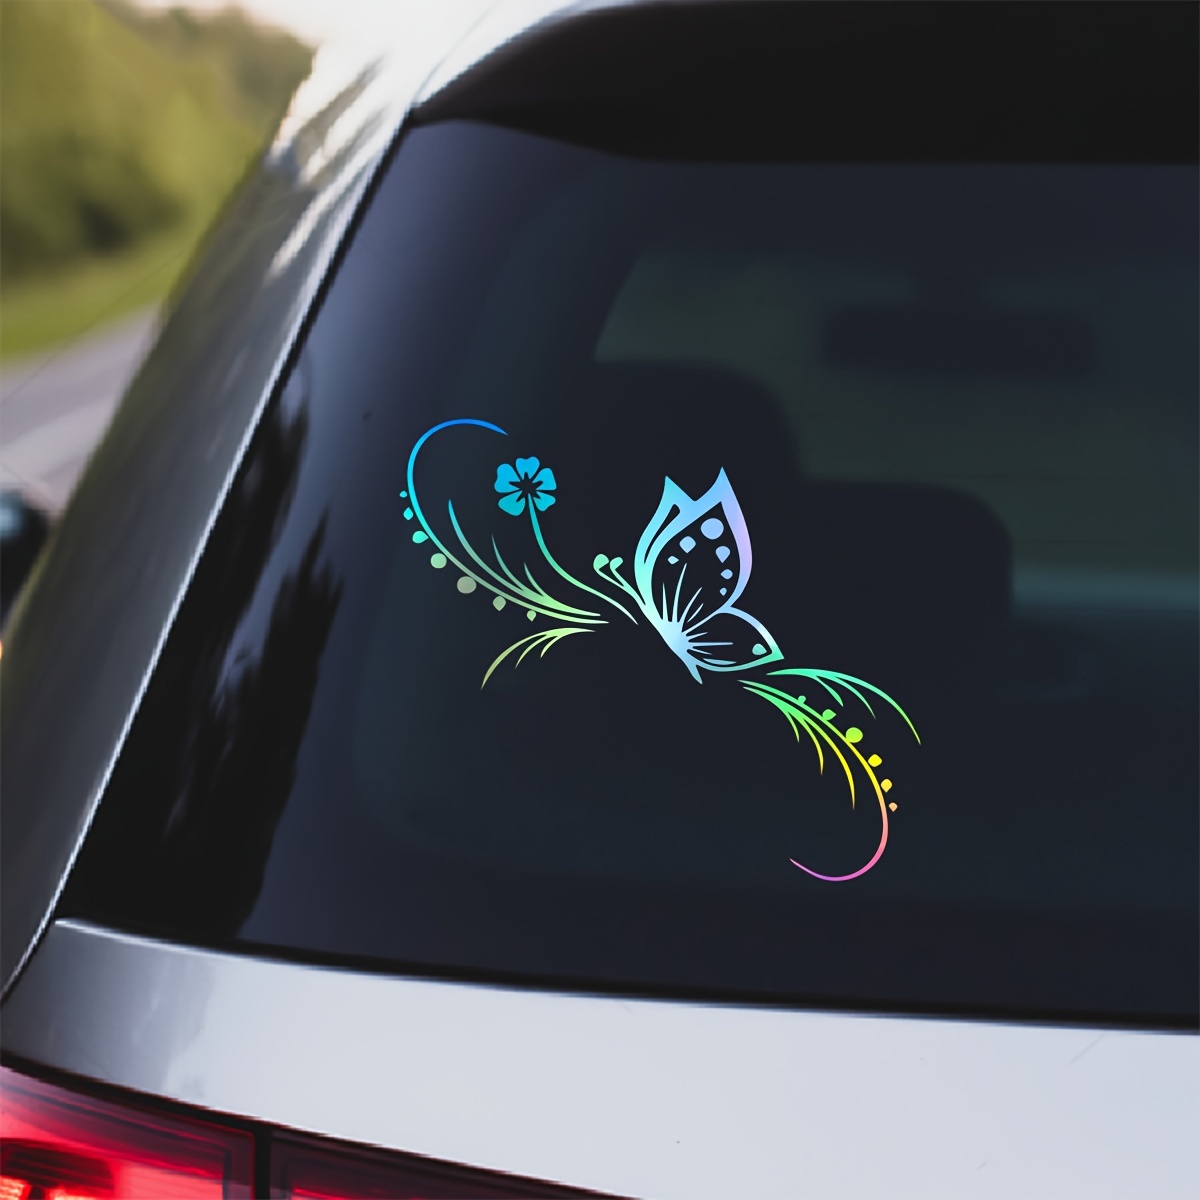 Buy Car & Bike Stickers Online, Vehicle Styling Accessories